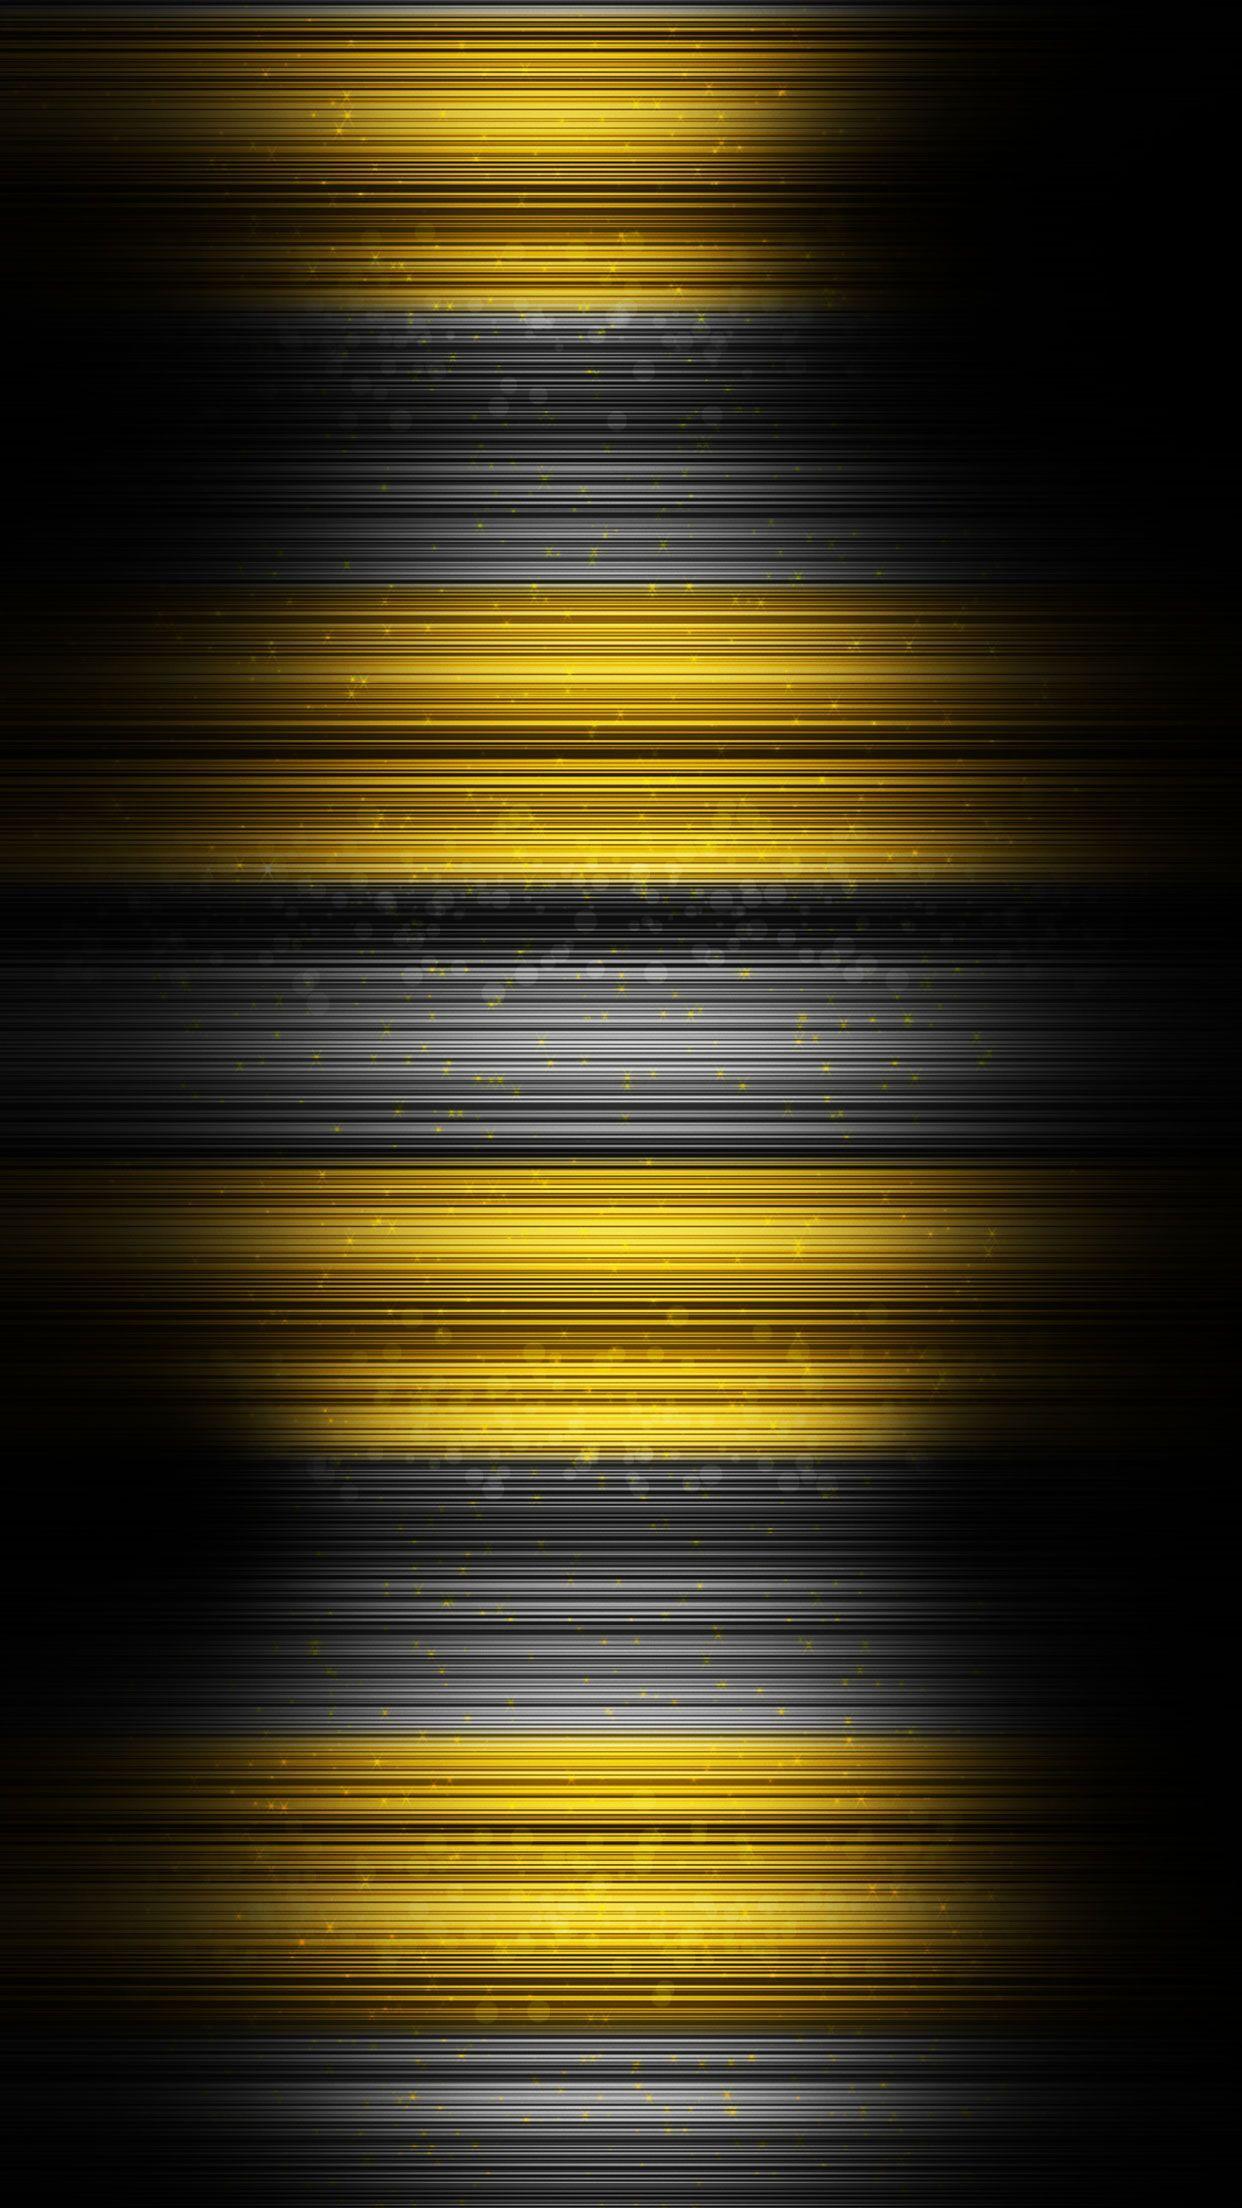 Black and Yellow iPhone Wallpapers